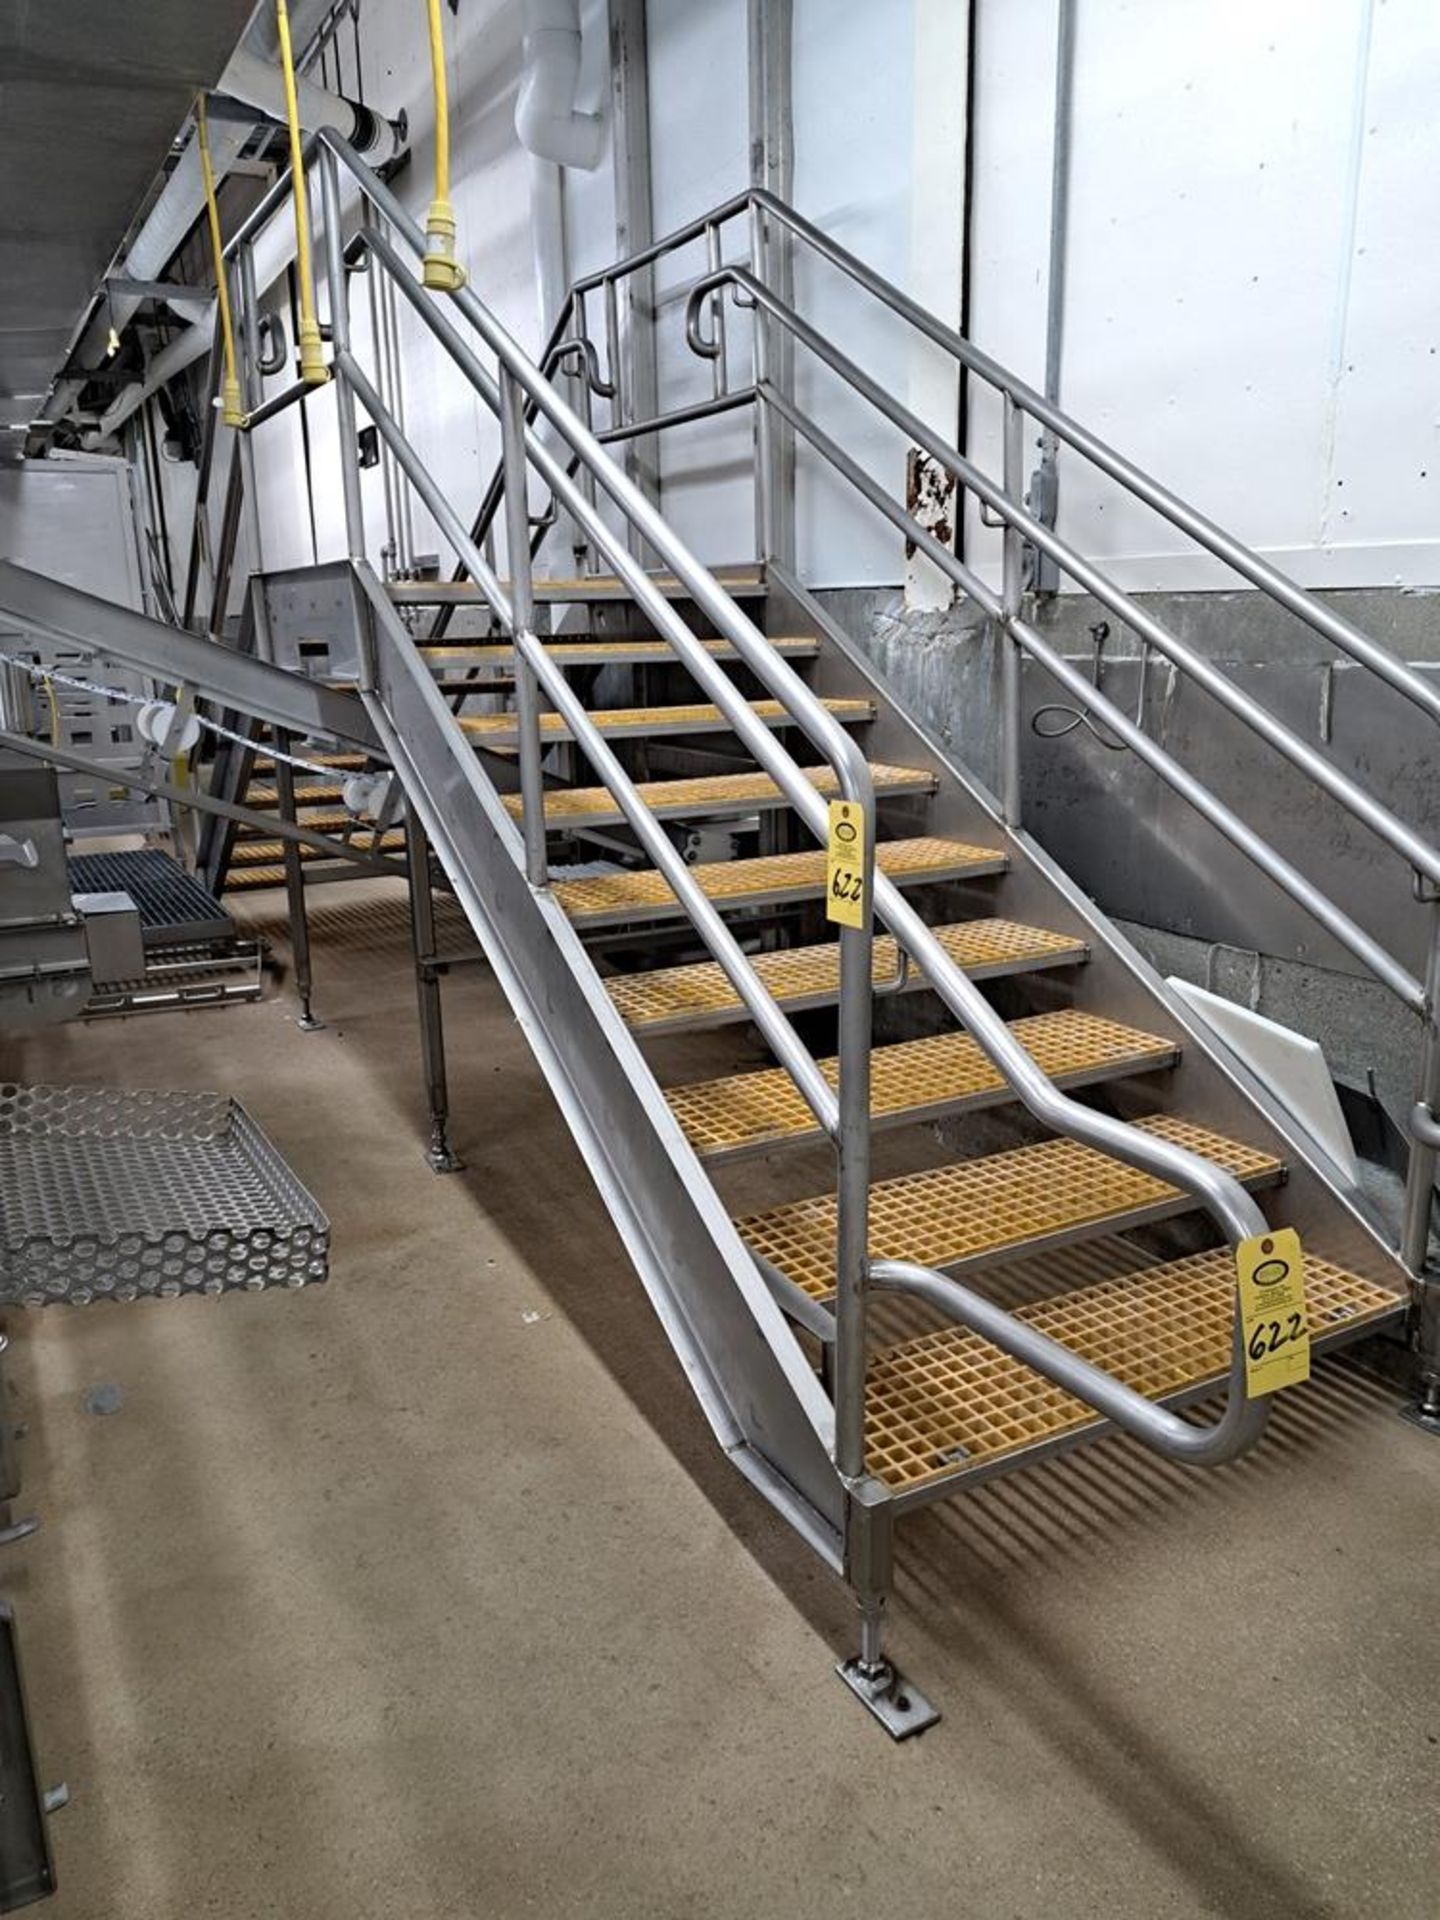 Stainless Steel Crossover, 4' W X 24' L, 64" W X 51" H opening: Required Loading Fee $800.00,